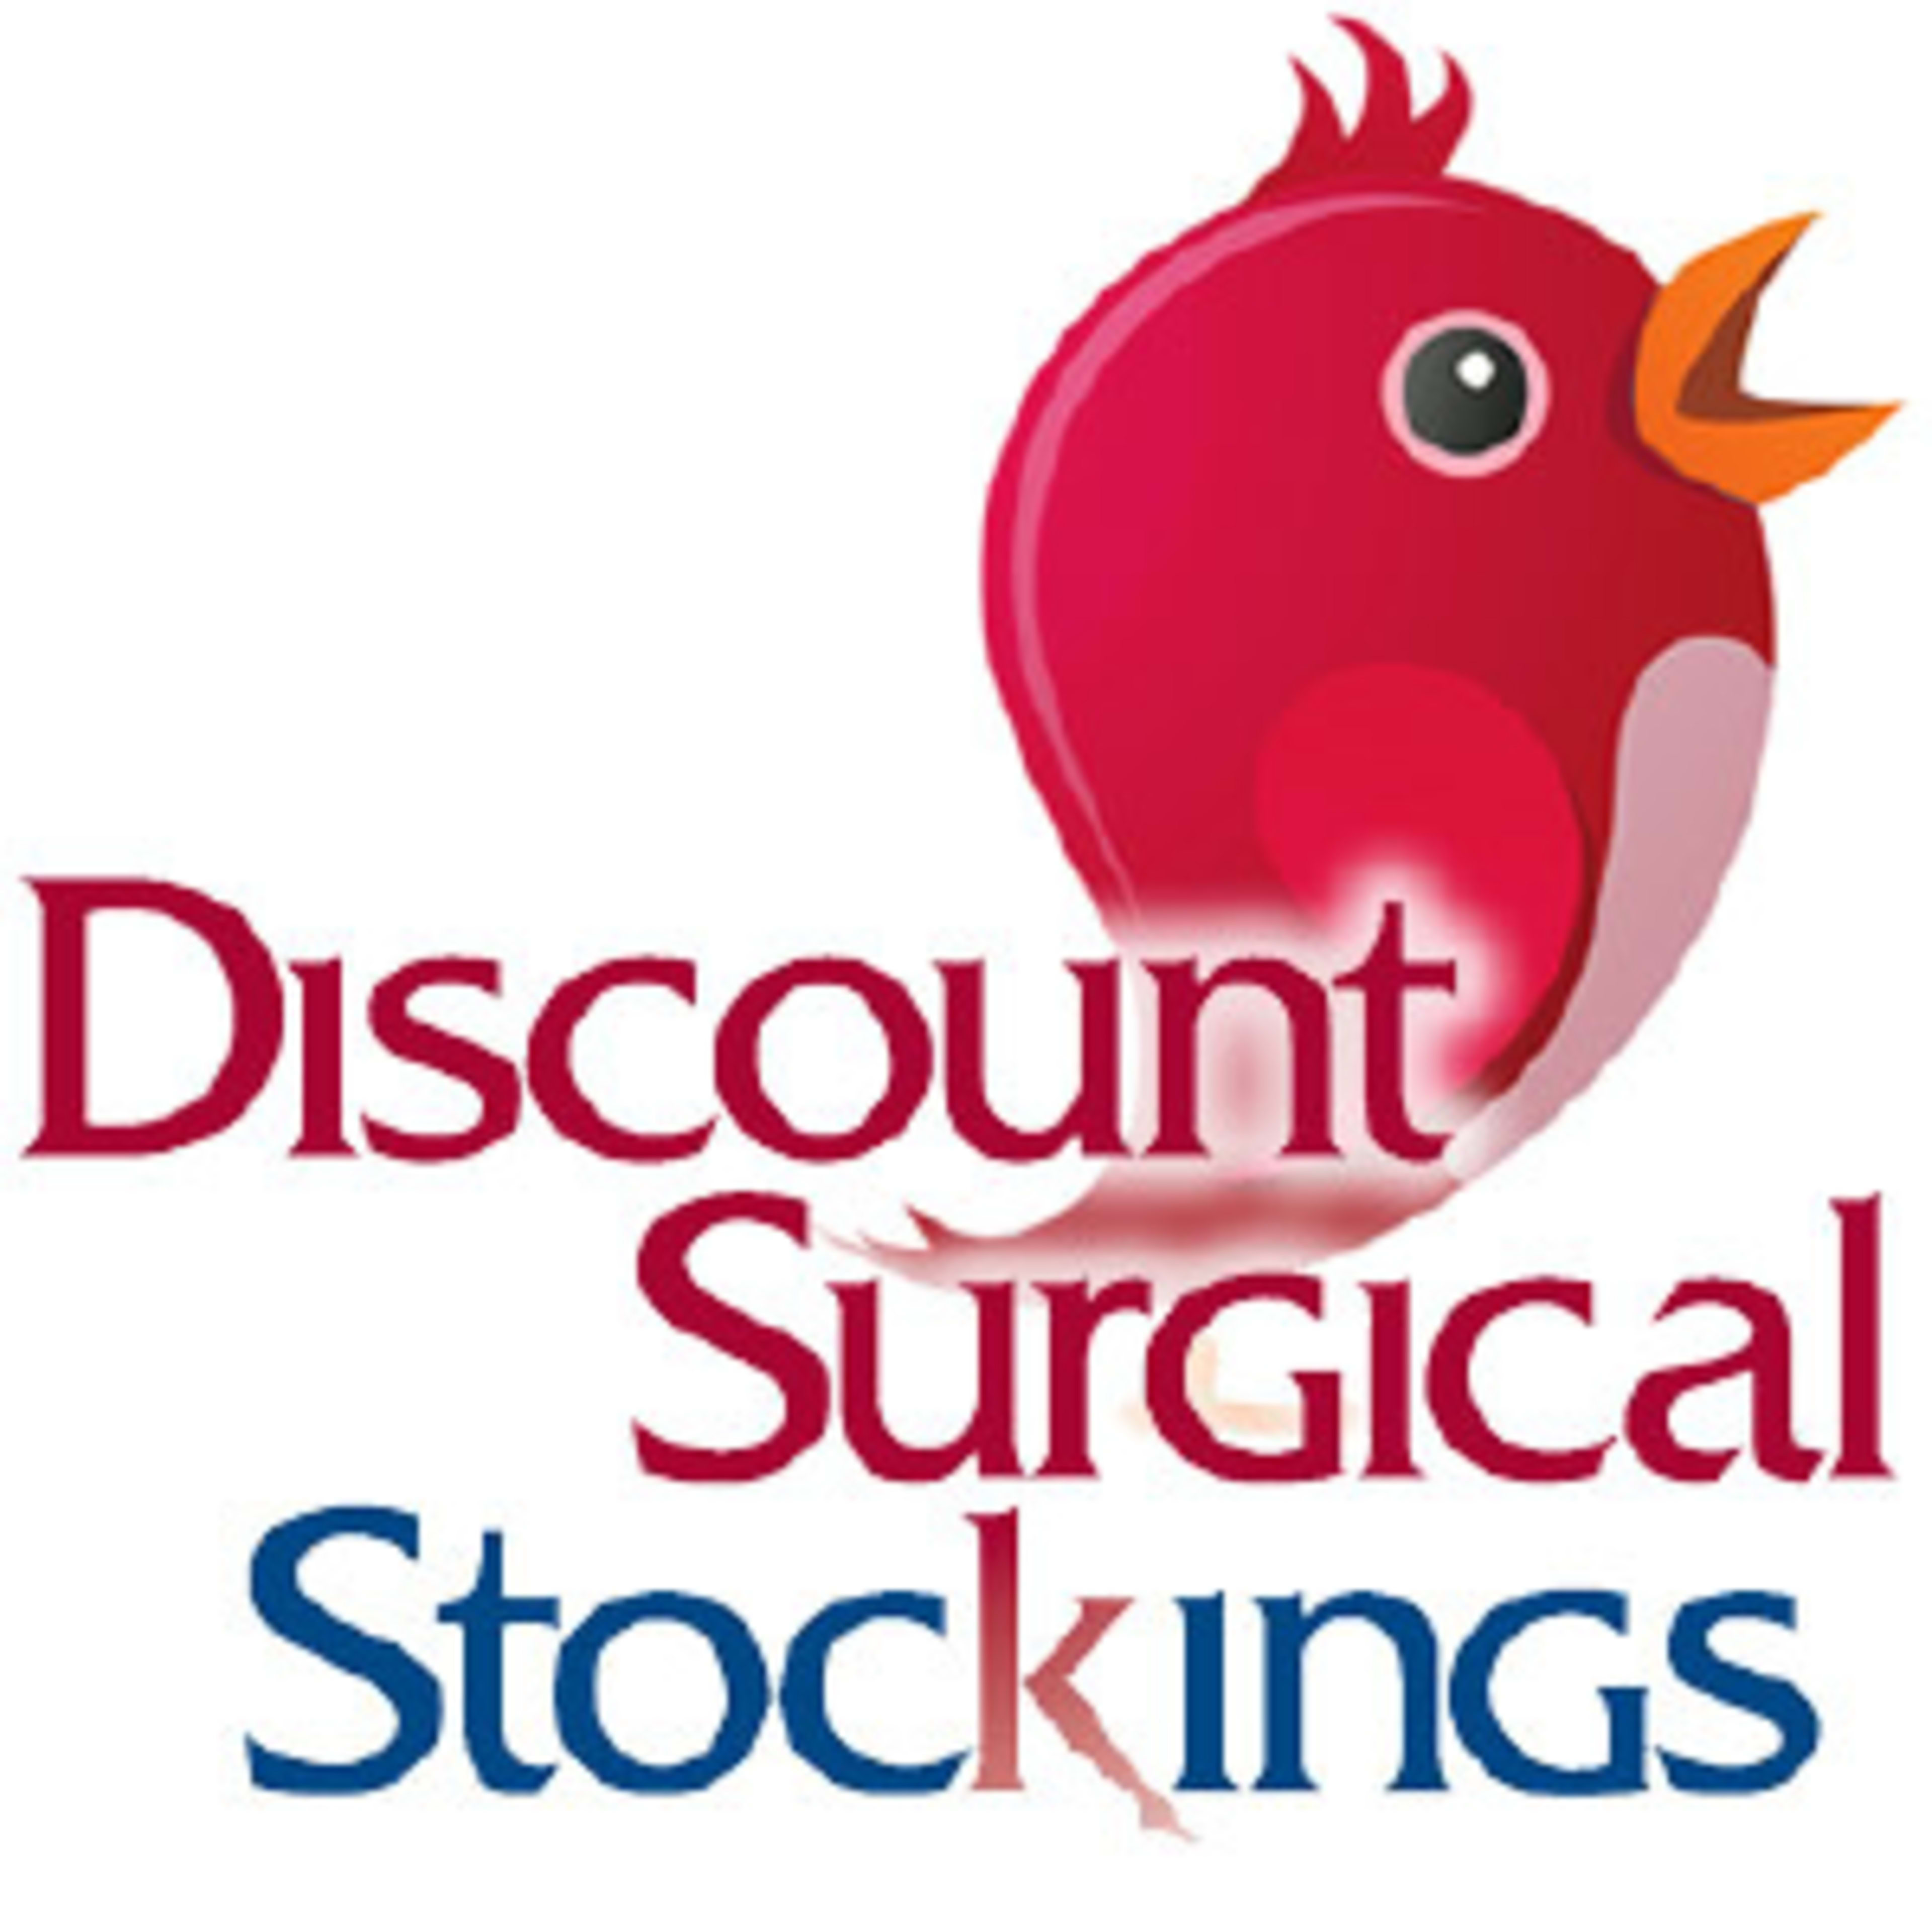 Discount Surgical StockingsCode